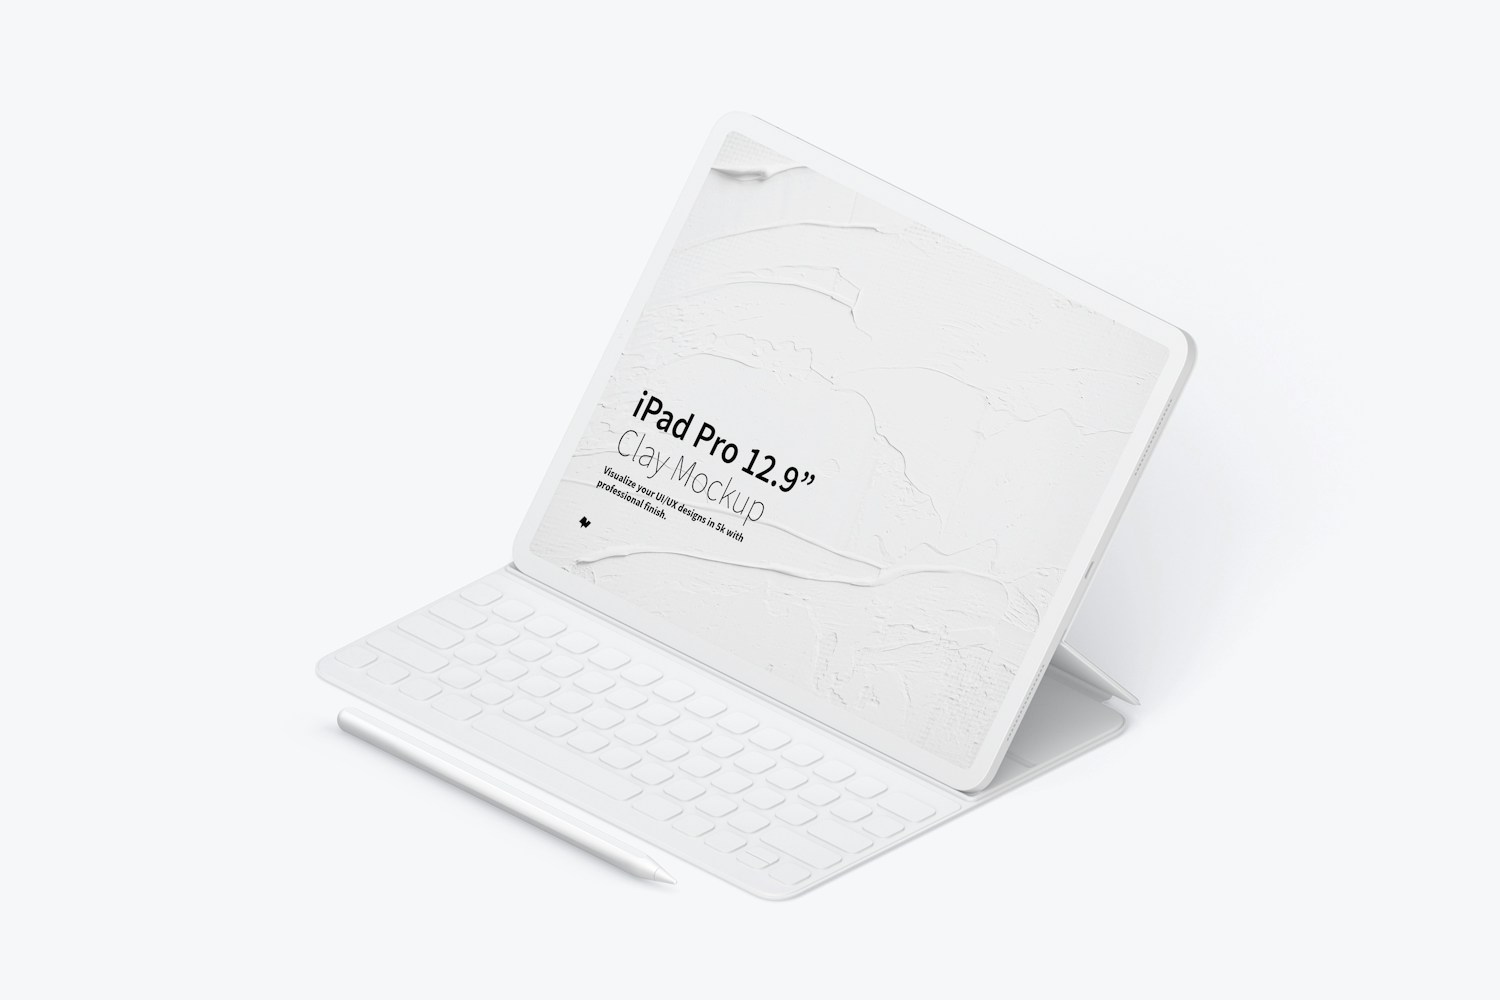 Clay iPad Pro 12.9” Mockup, Isometric Right View With Keyboard